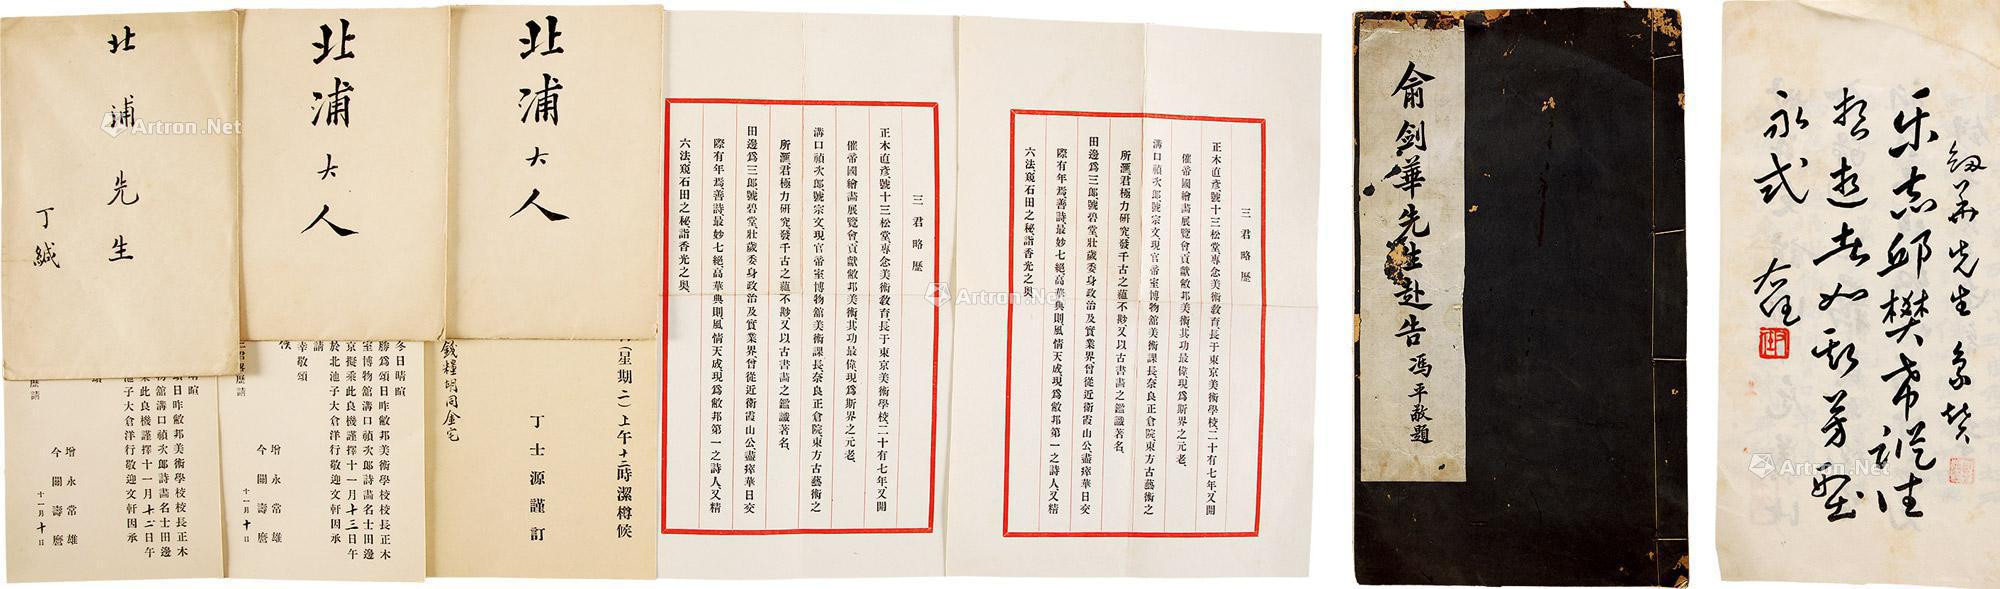 Group of Greeting Card Invitation of Ding Shiyuan and one Book of “Mr. Yu Jianhua to Sue”， with original covers